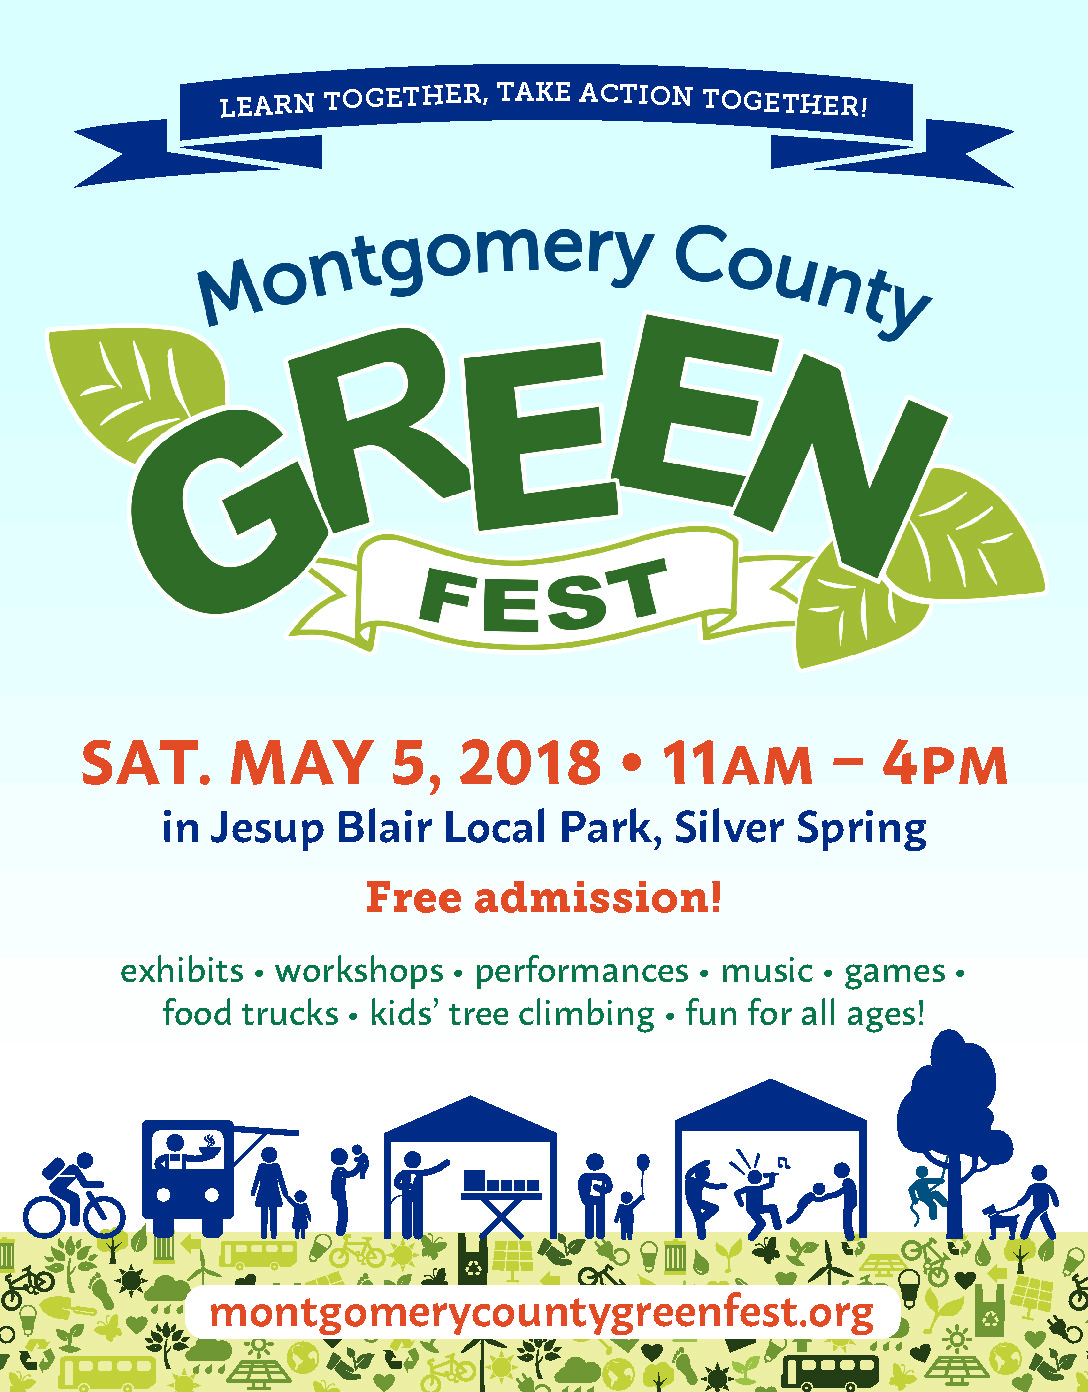 Montgomery County Greenfest